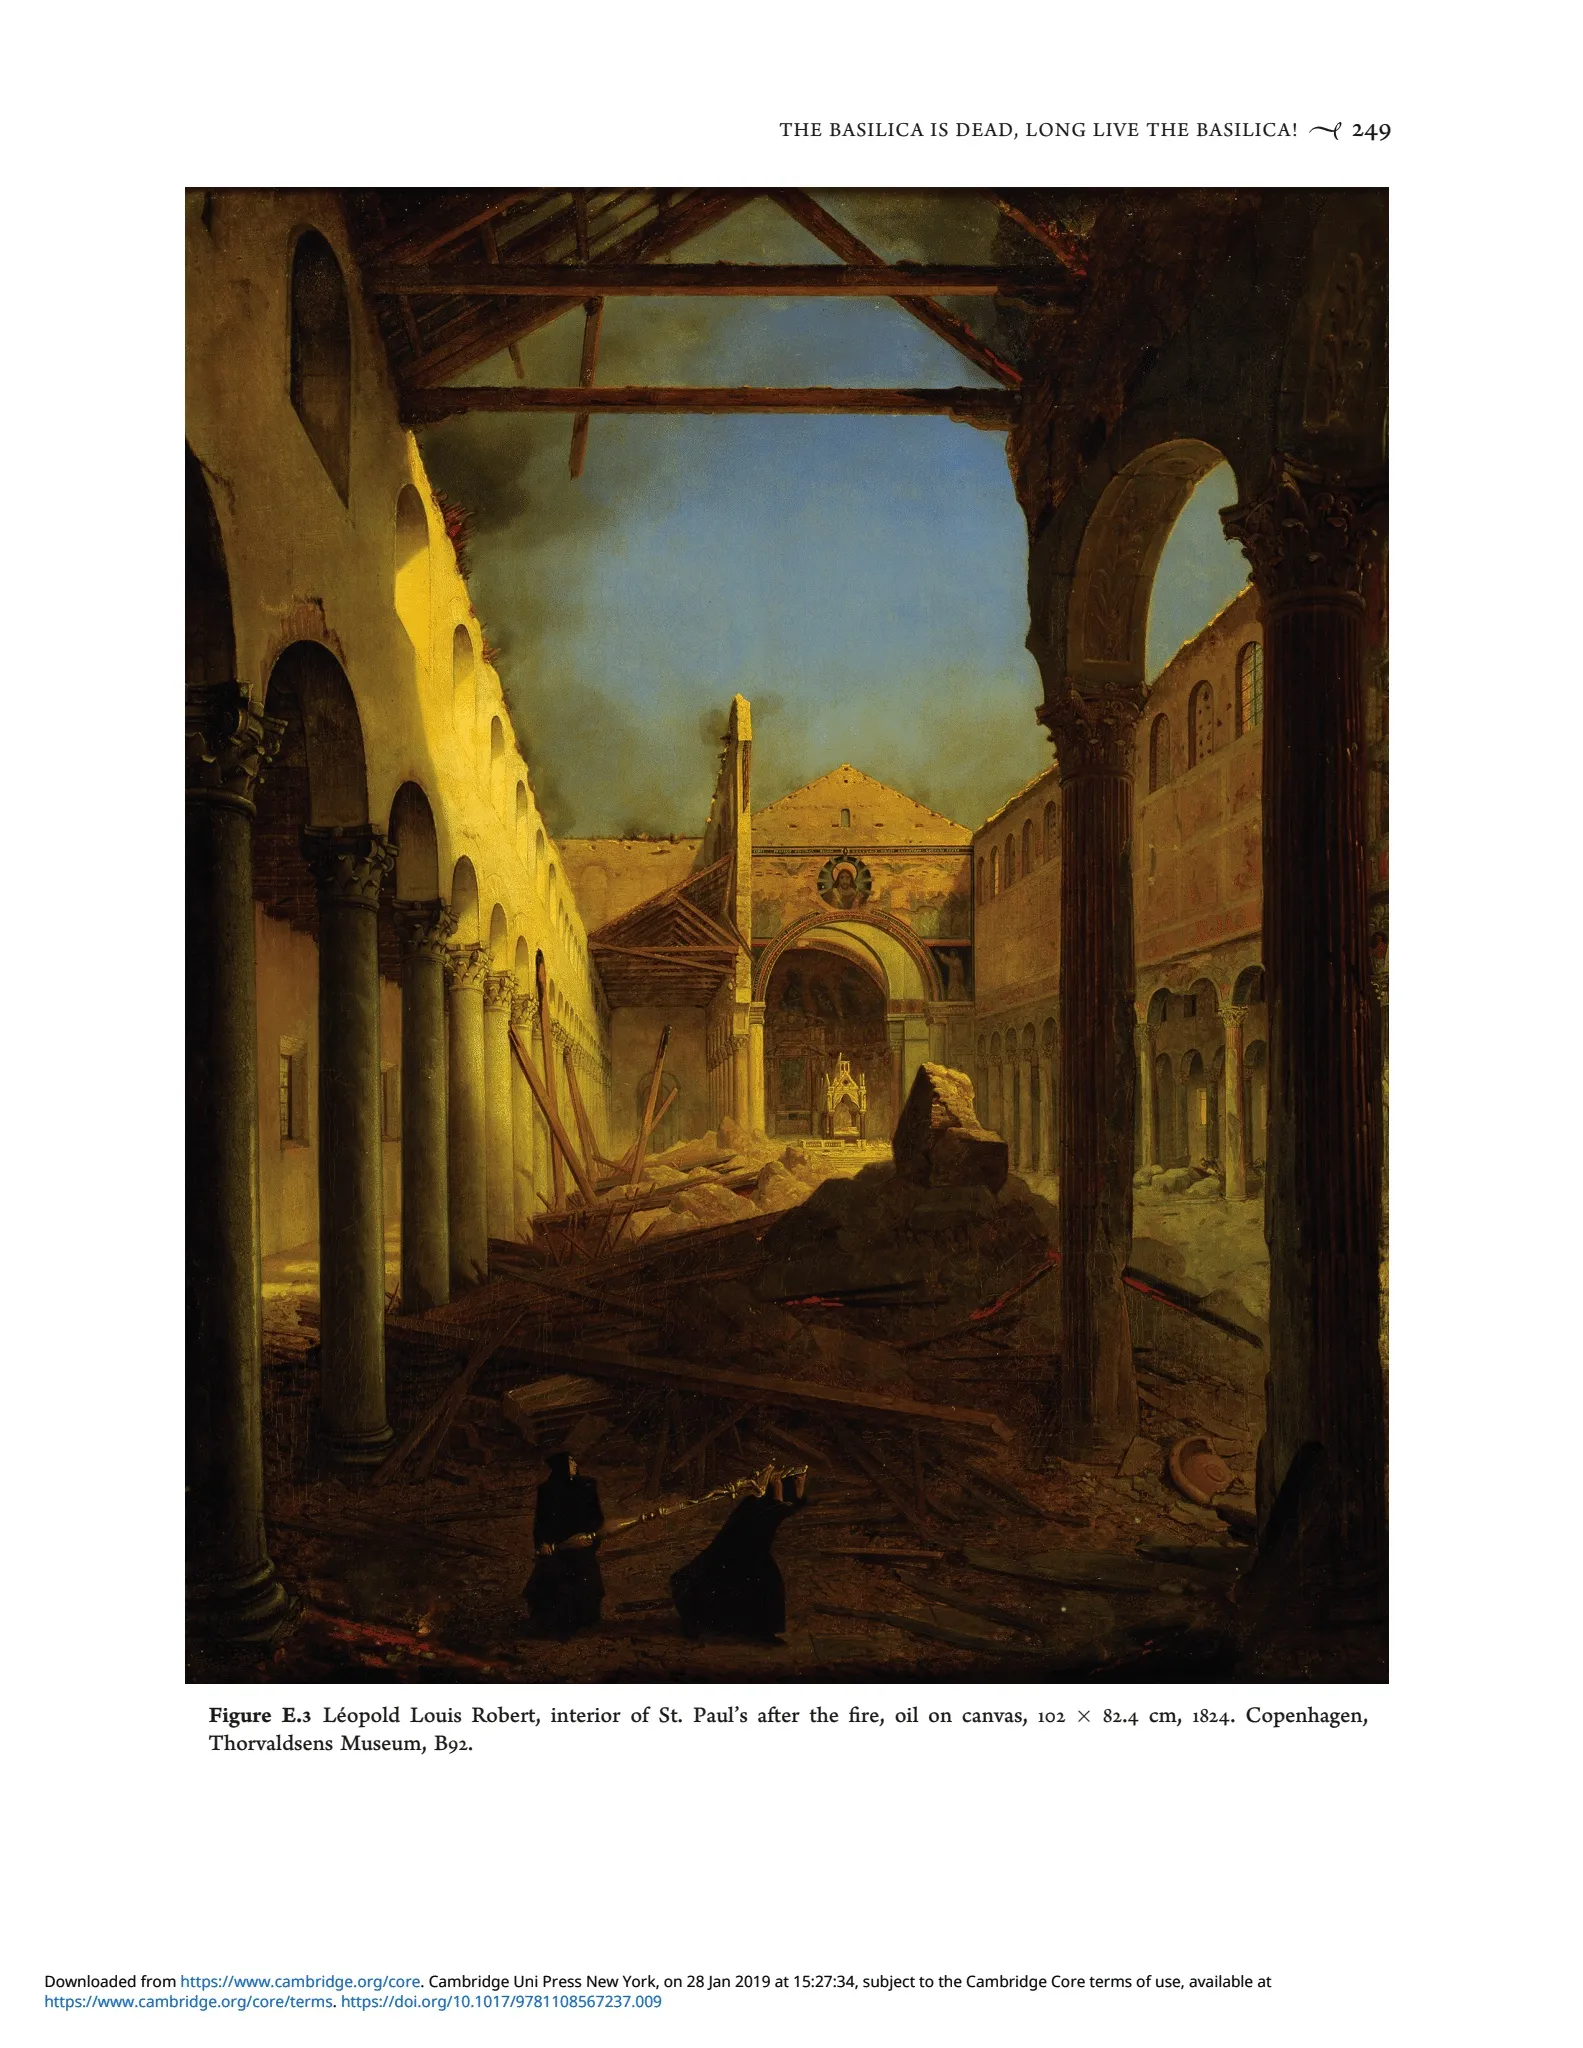 Color illustration of historic fire at St. Paul Outside the Walls in Rome, 1823, depicted in Professor Nicola Camerlenghi's book "St. Paul's Outside the Walls, A Roman Basilica, from Antiquity to the Modern Era," 2018. Photo courtesy of Professor Nicola Camerlenghi from his book "St. Paul's Outside the Walls, A Roman Basilica, from Antiquity to the Modern Era," 2018